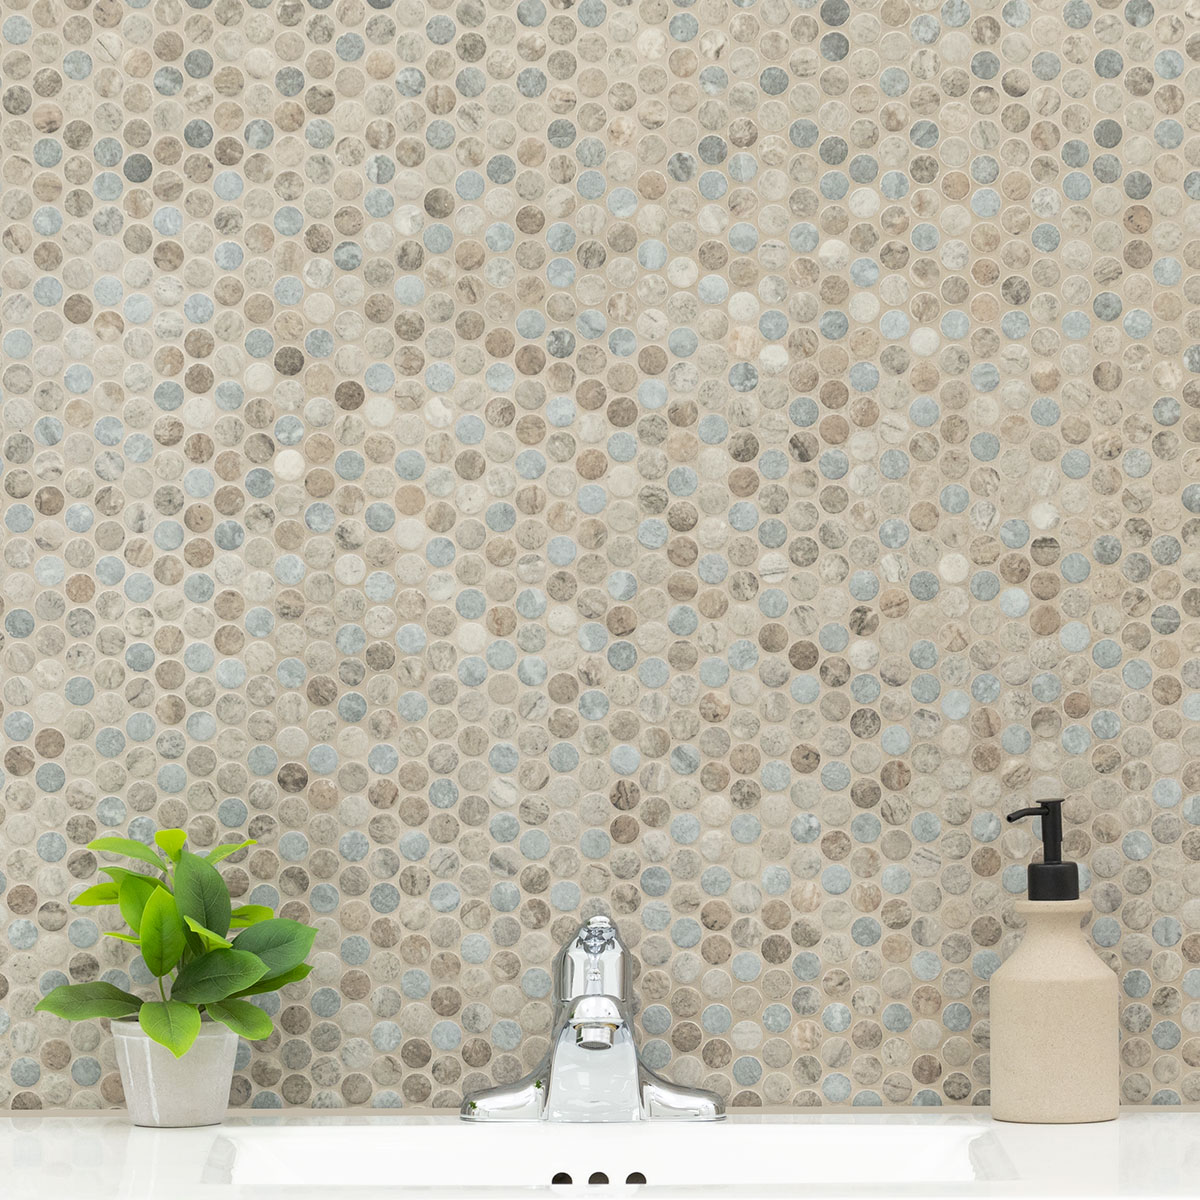 Stonella Penny Round mosaic tile wall in bathroom